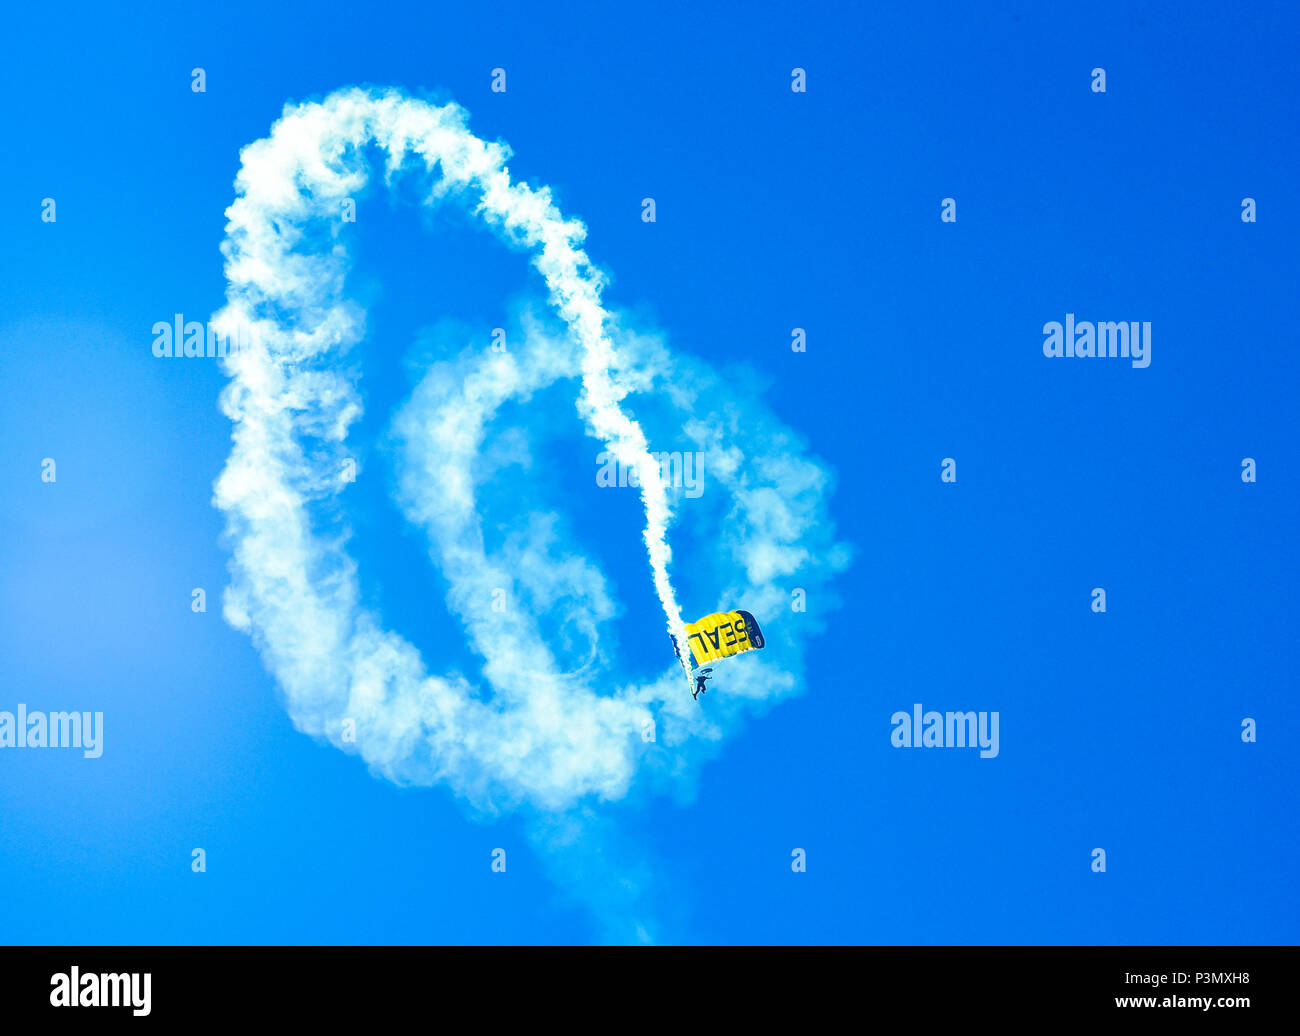 160710-N-VY375-002 SAN DIEGO (July 10, 2016) – Lt. (SEAL) Duncan Hamilton, member of the U.S. Navy Parachute Team, the Leap Frogs, trails smoke during a demonstration at the Major League Baseball All-Star Futures Game above Petco Park. The Navy Parachute Team is based in San Diego and performs aerial parachute demonstrations around the nation in support of Naval Special Warfare and Navy recruiting. (U.S. Navy photo by Special Operator 1st Class Remington Peters/Released) Stock Photo